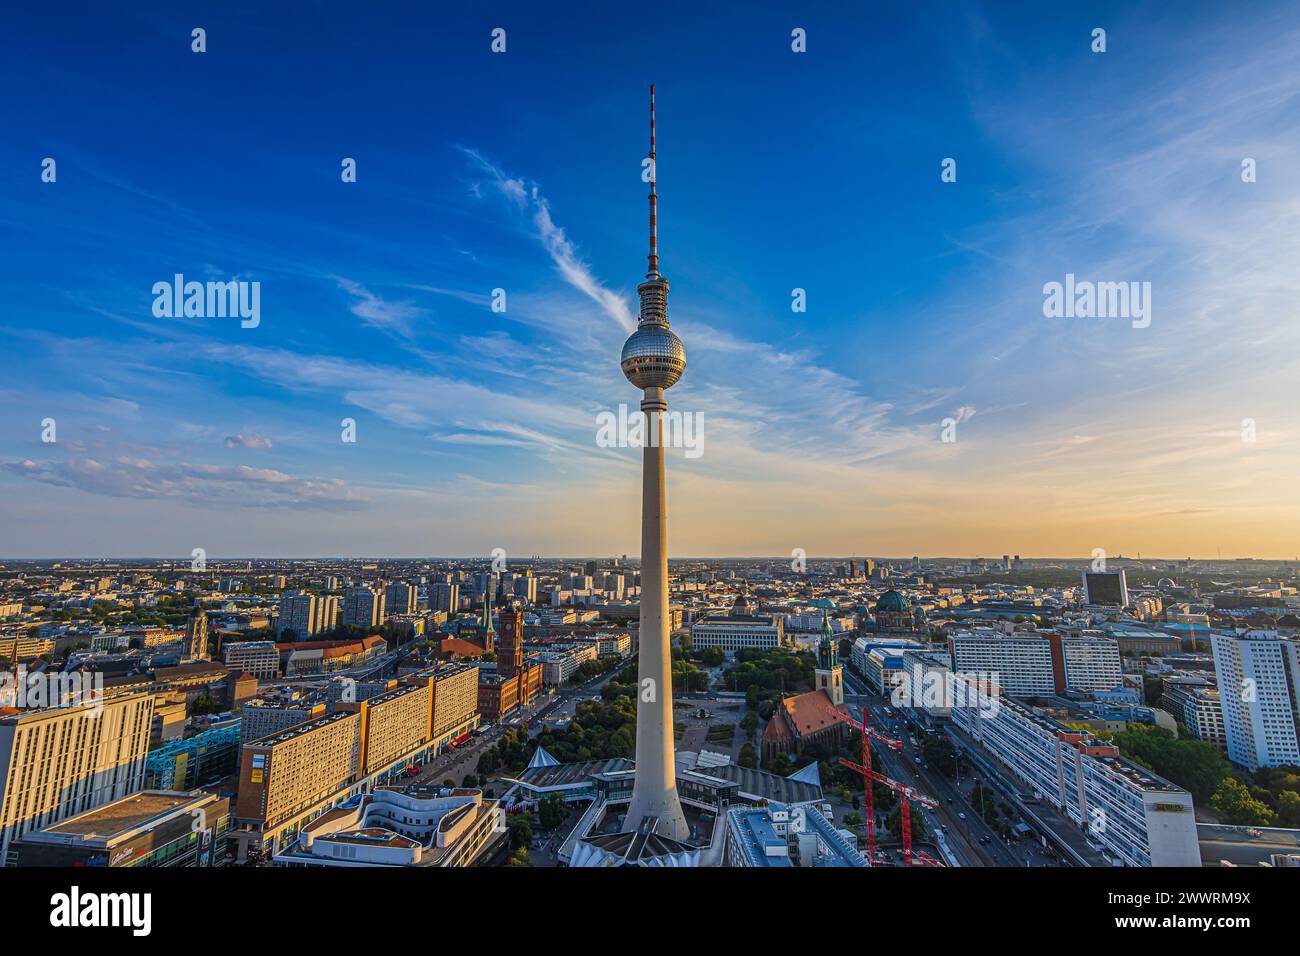 Berlin skyline in summer. Television tower in the center of the capital of Germany in the evening. High-rise buildings around the at Alexanderplatz Stock Photo